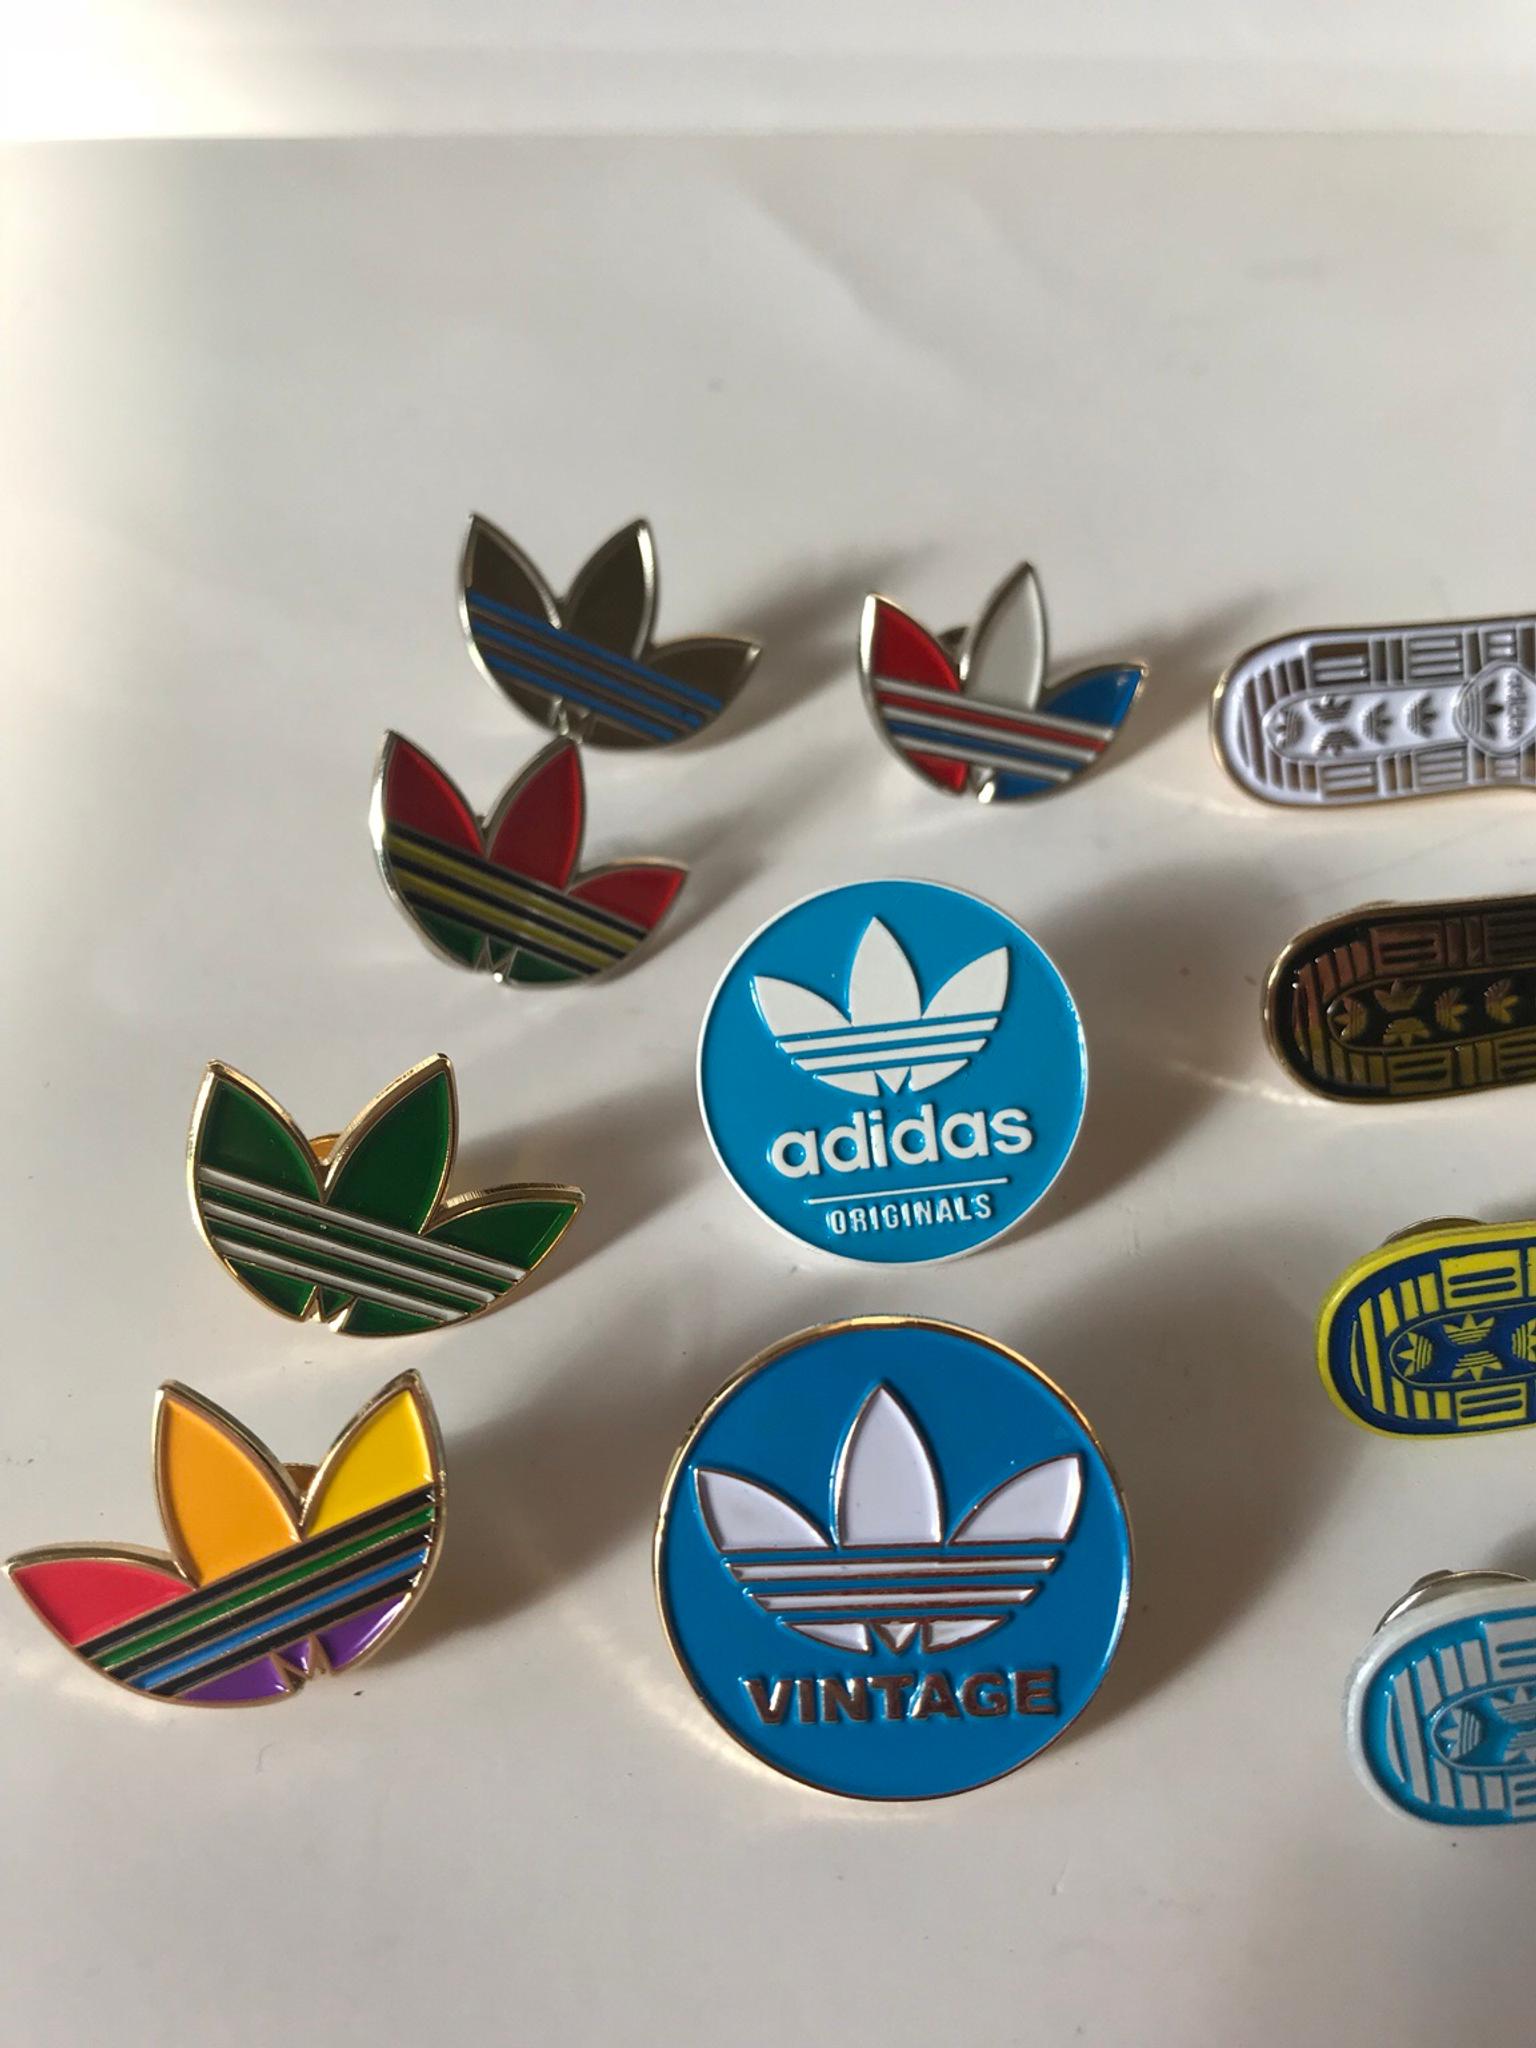 15 stone island \u0026 Adidas Originals pin badges in LS2 Leeds for £29.99 for  sale | Shpock